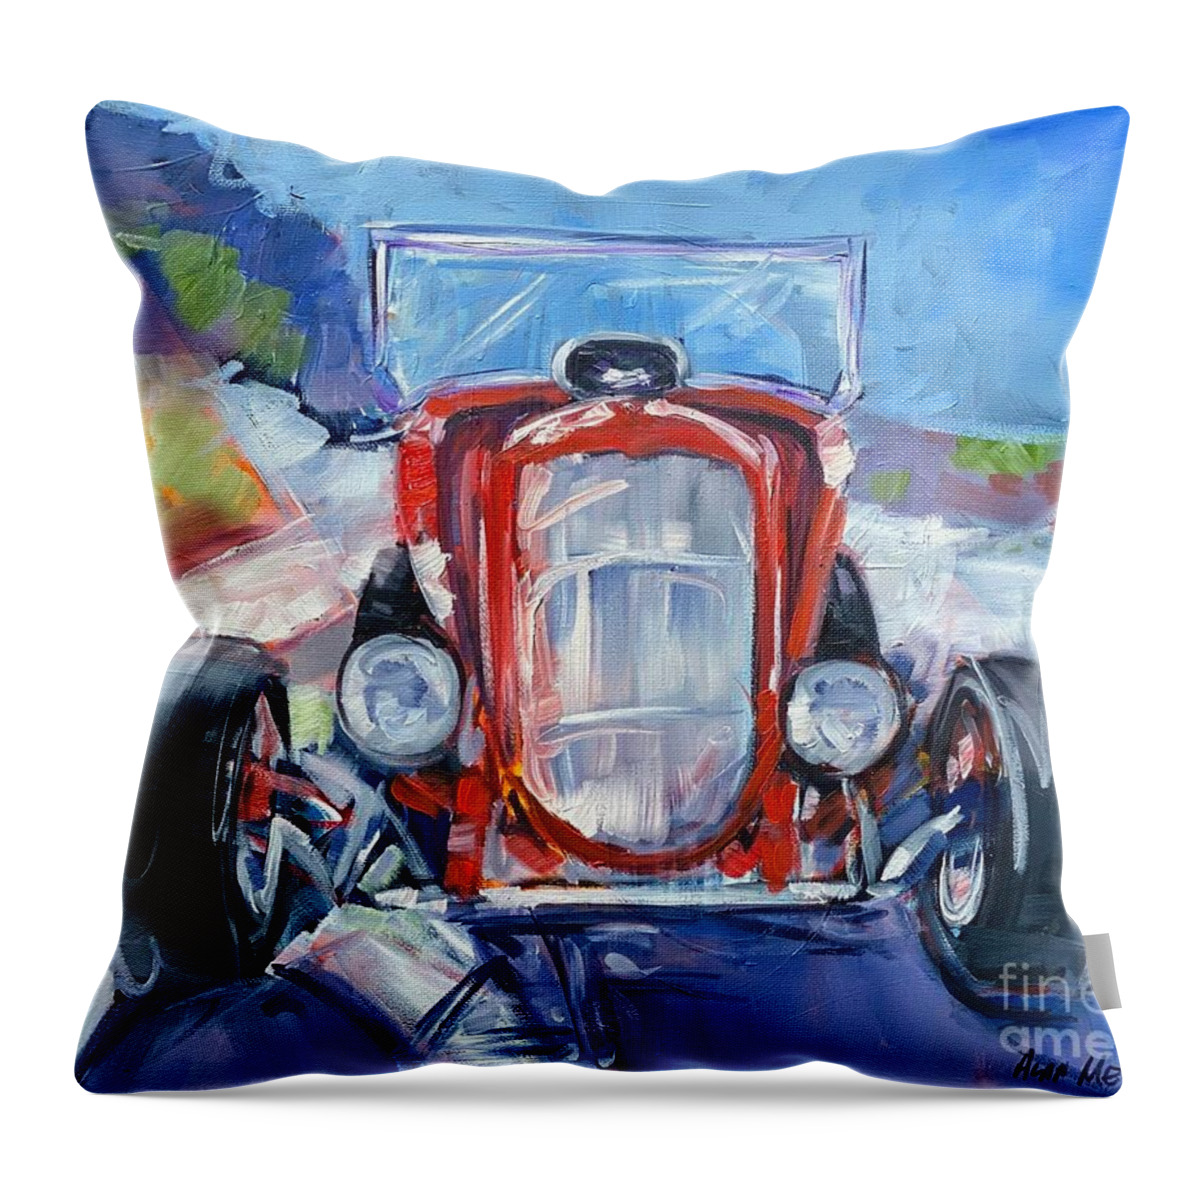 Hot Rod Throw Pillow featuring the painting Low Rider by Alan Metzger